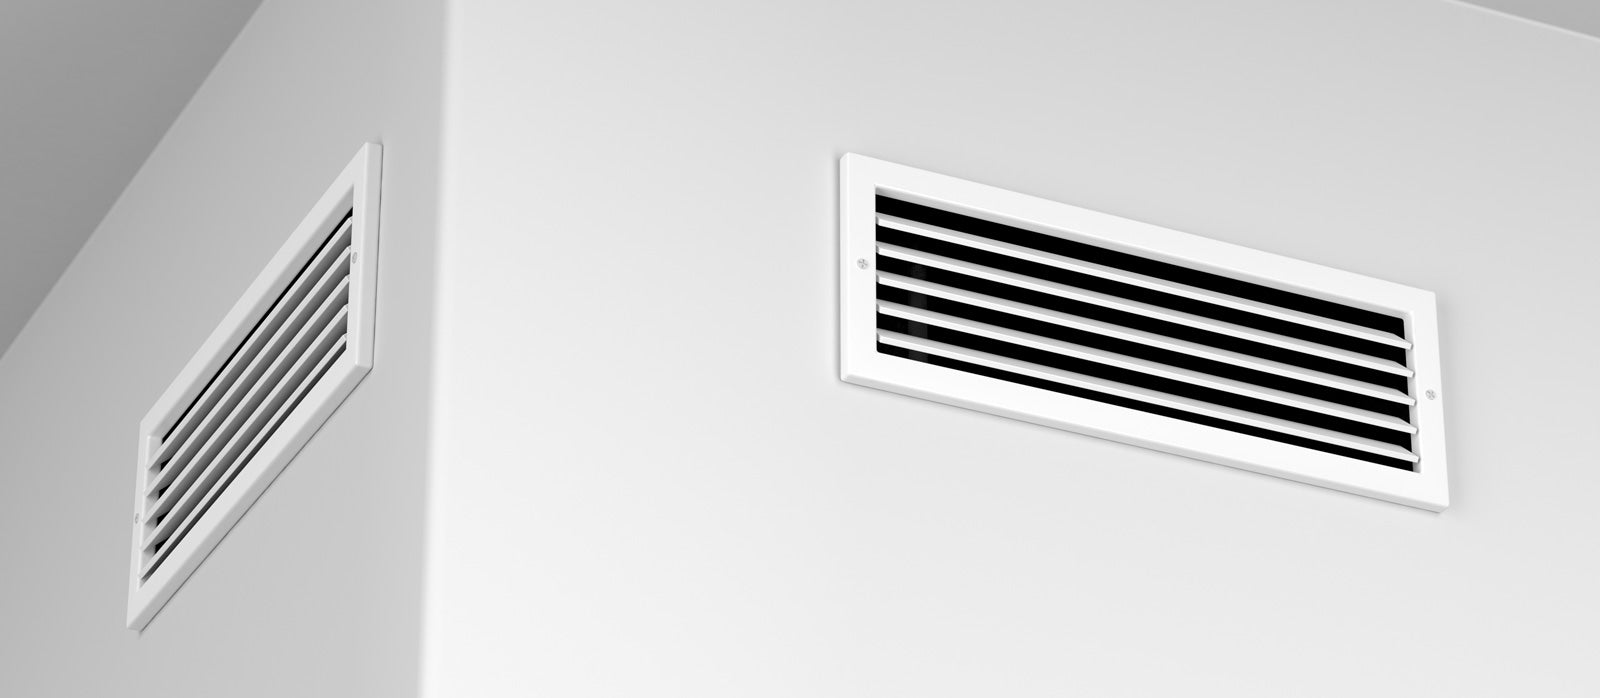 Air purifier vents in a house 